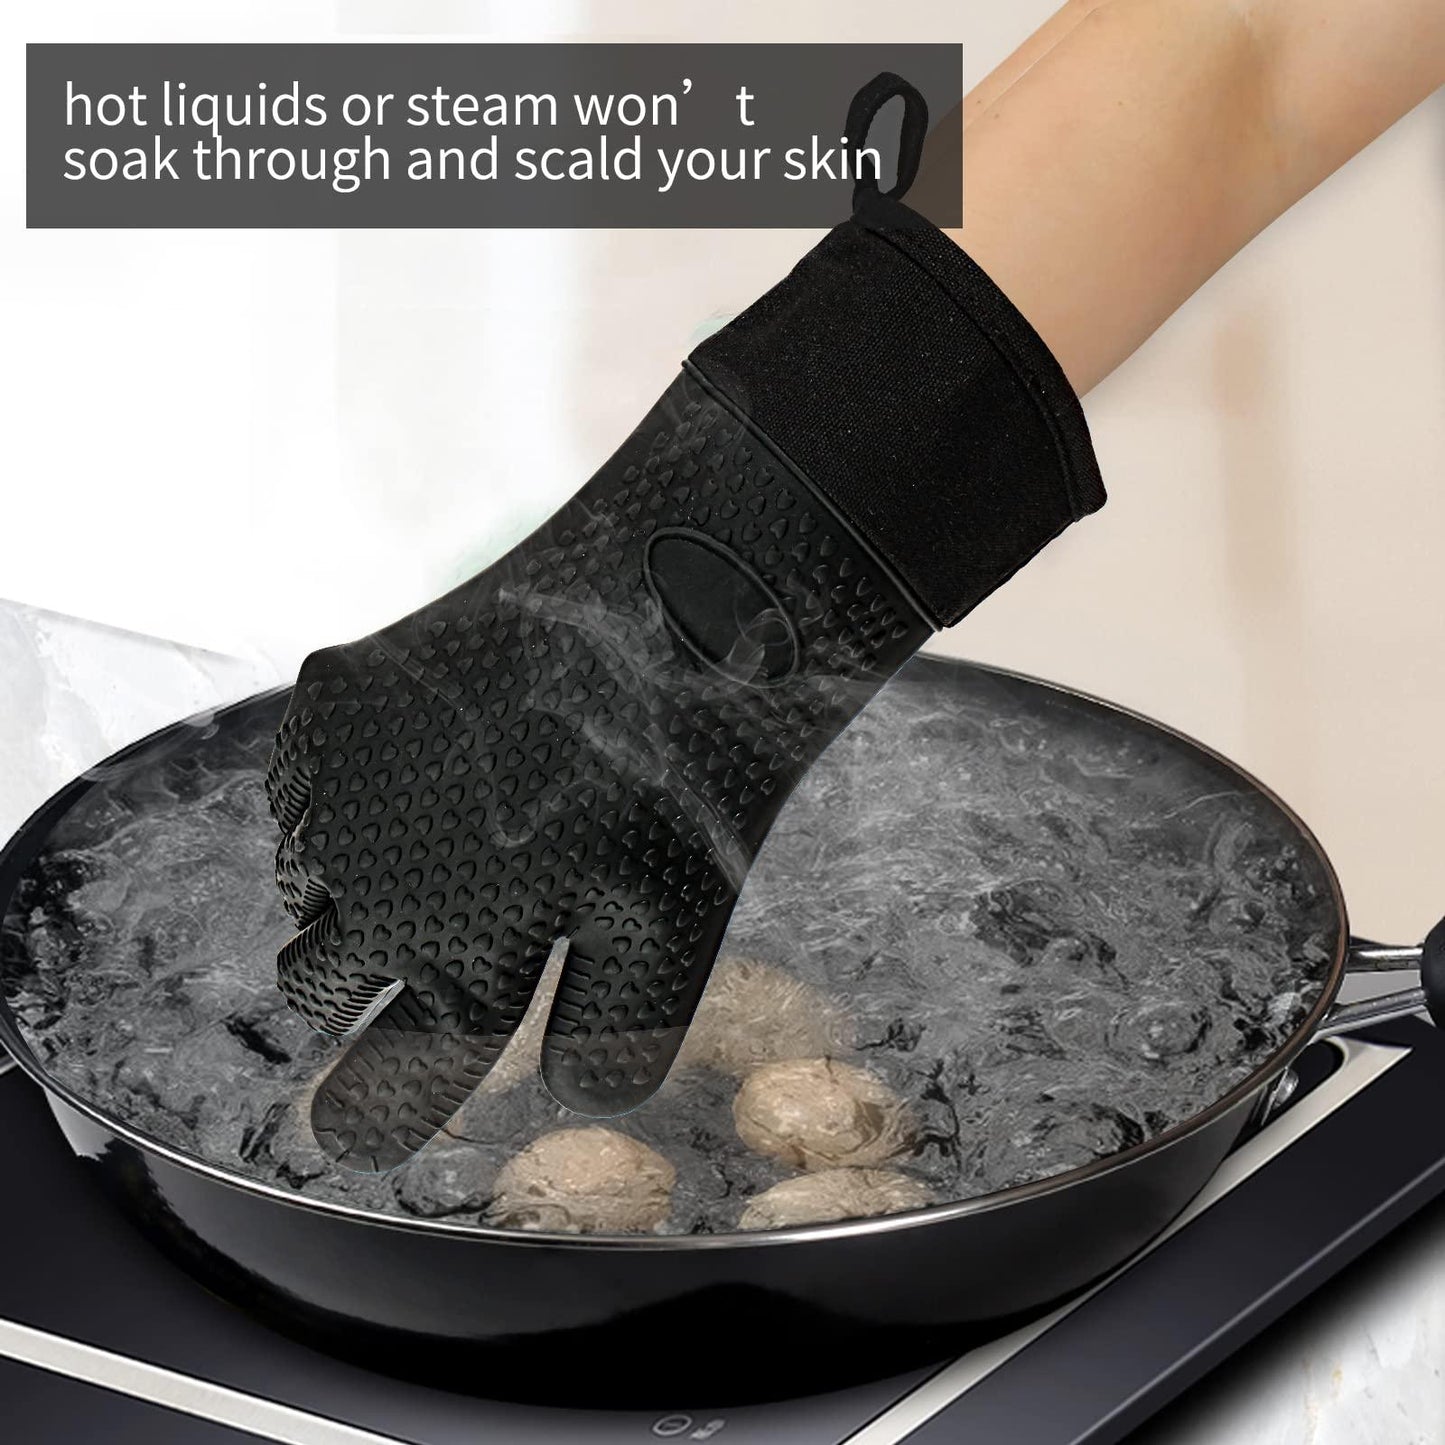 Waterproof BBQ Grill Oven Gloves Heat Resistant,Extra Long,Soft Quilted Lining, Silicone Gloves for Grilling Smoking Barbecue-Great for Handling Hot Food on Your Grill Fryer and Pit,Easy Clean,1 Pair - CookCave